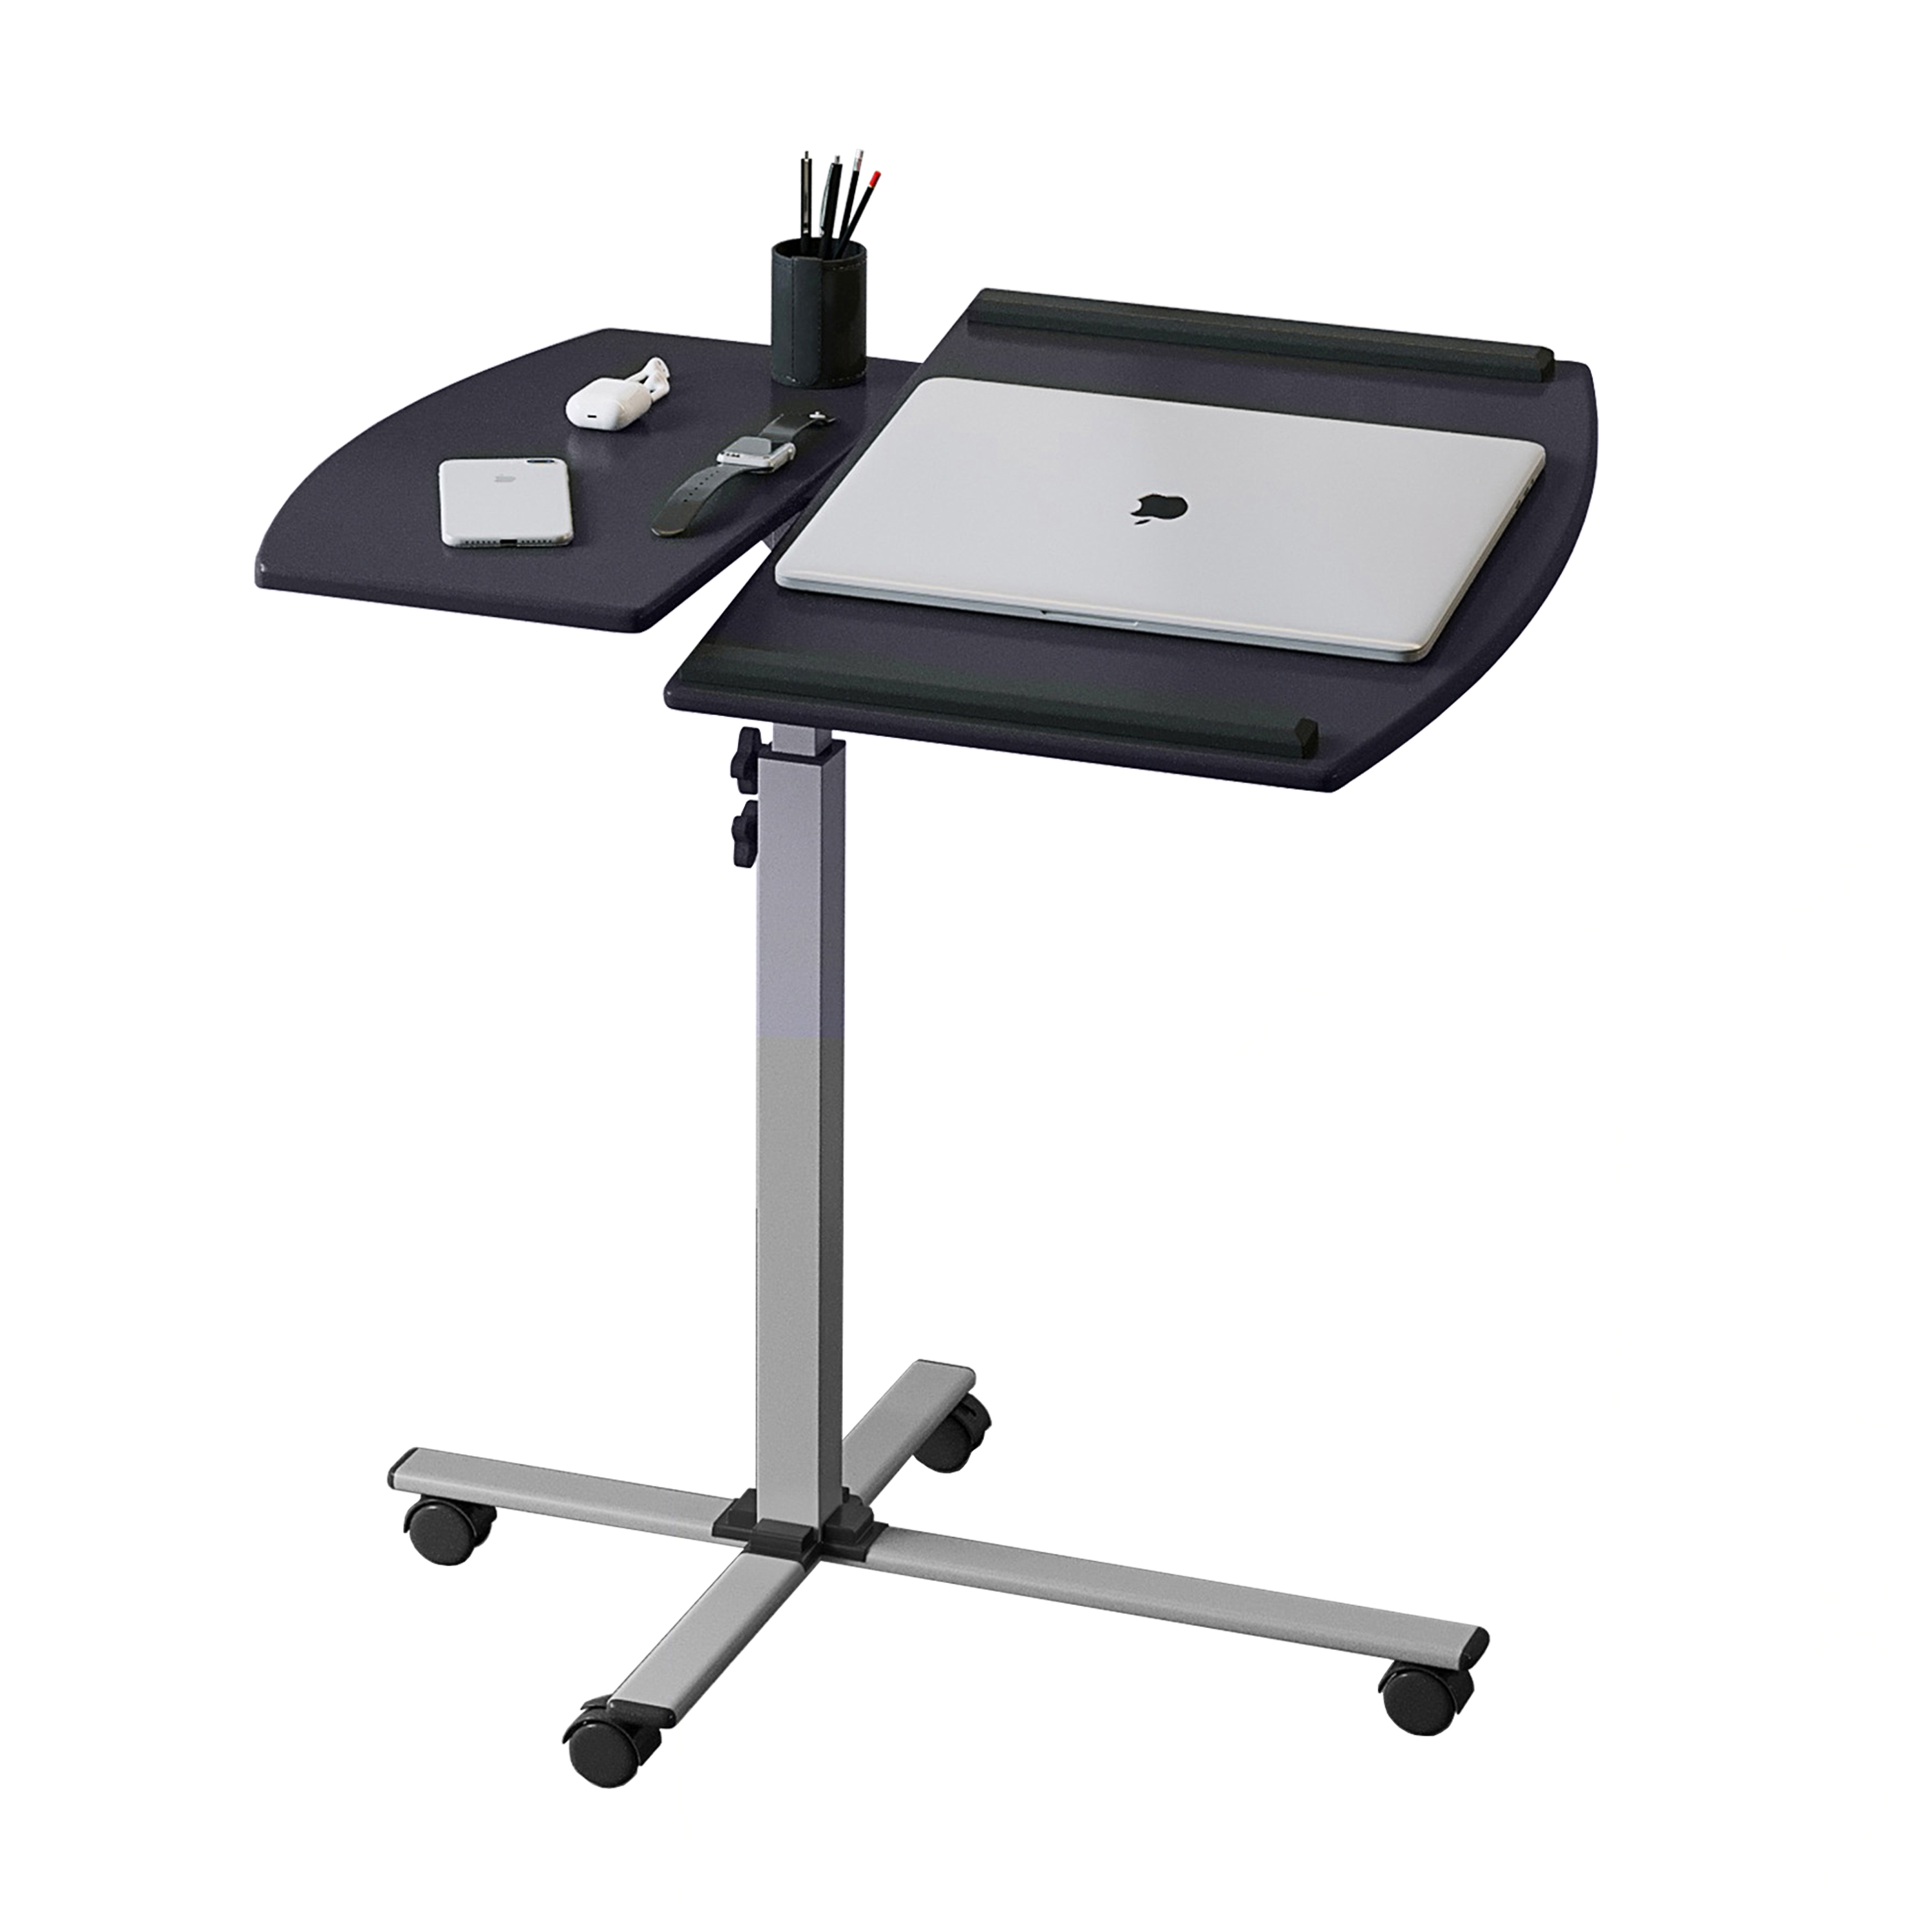 Techni Mobili Deluxe Rolling Laptop Stand, Graphite - image 4 of 12